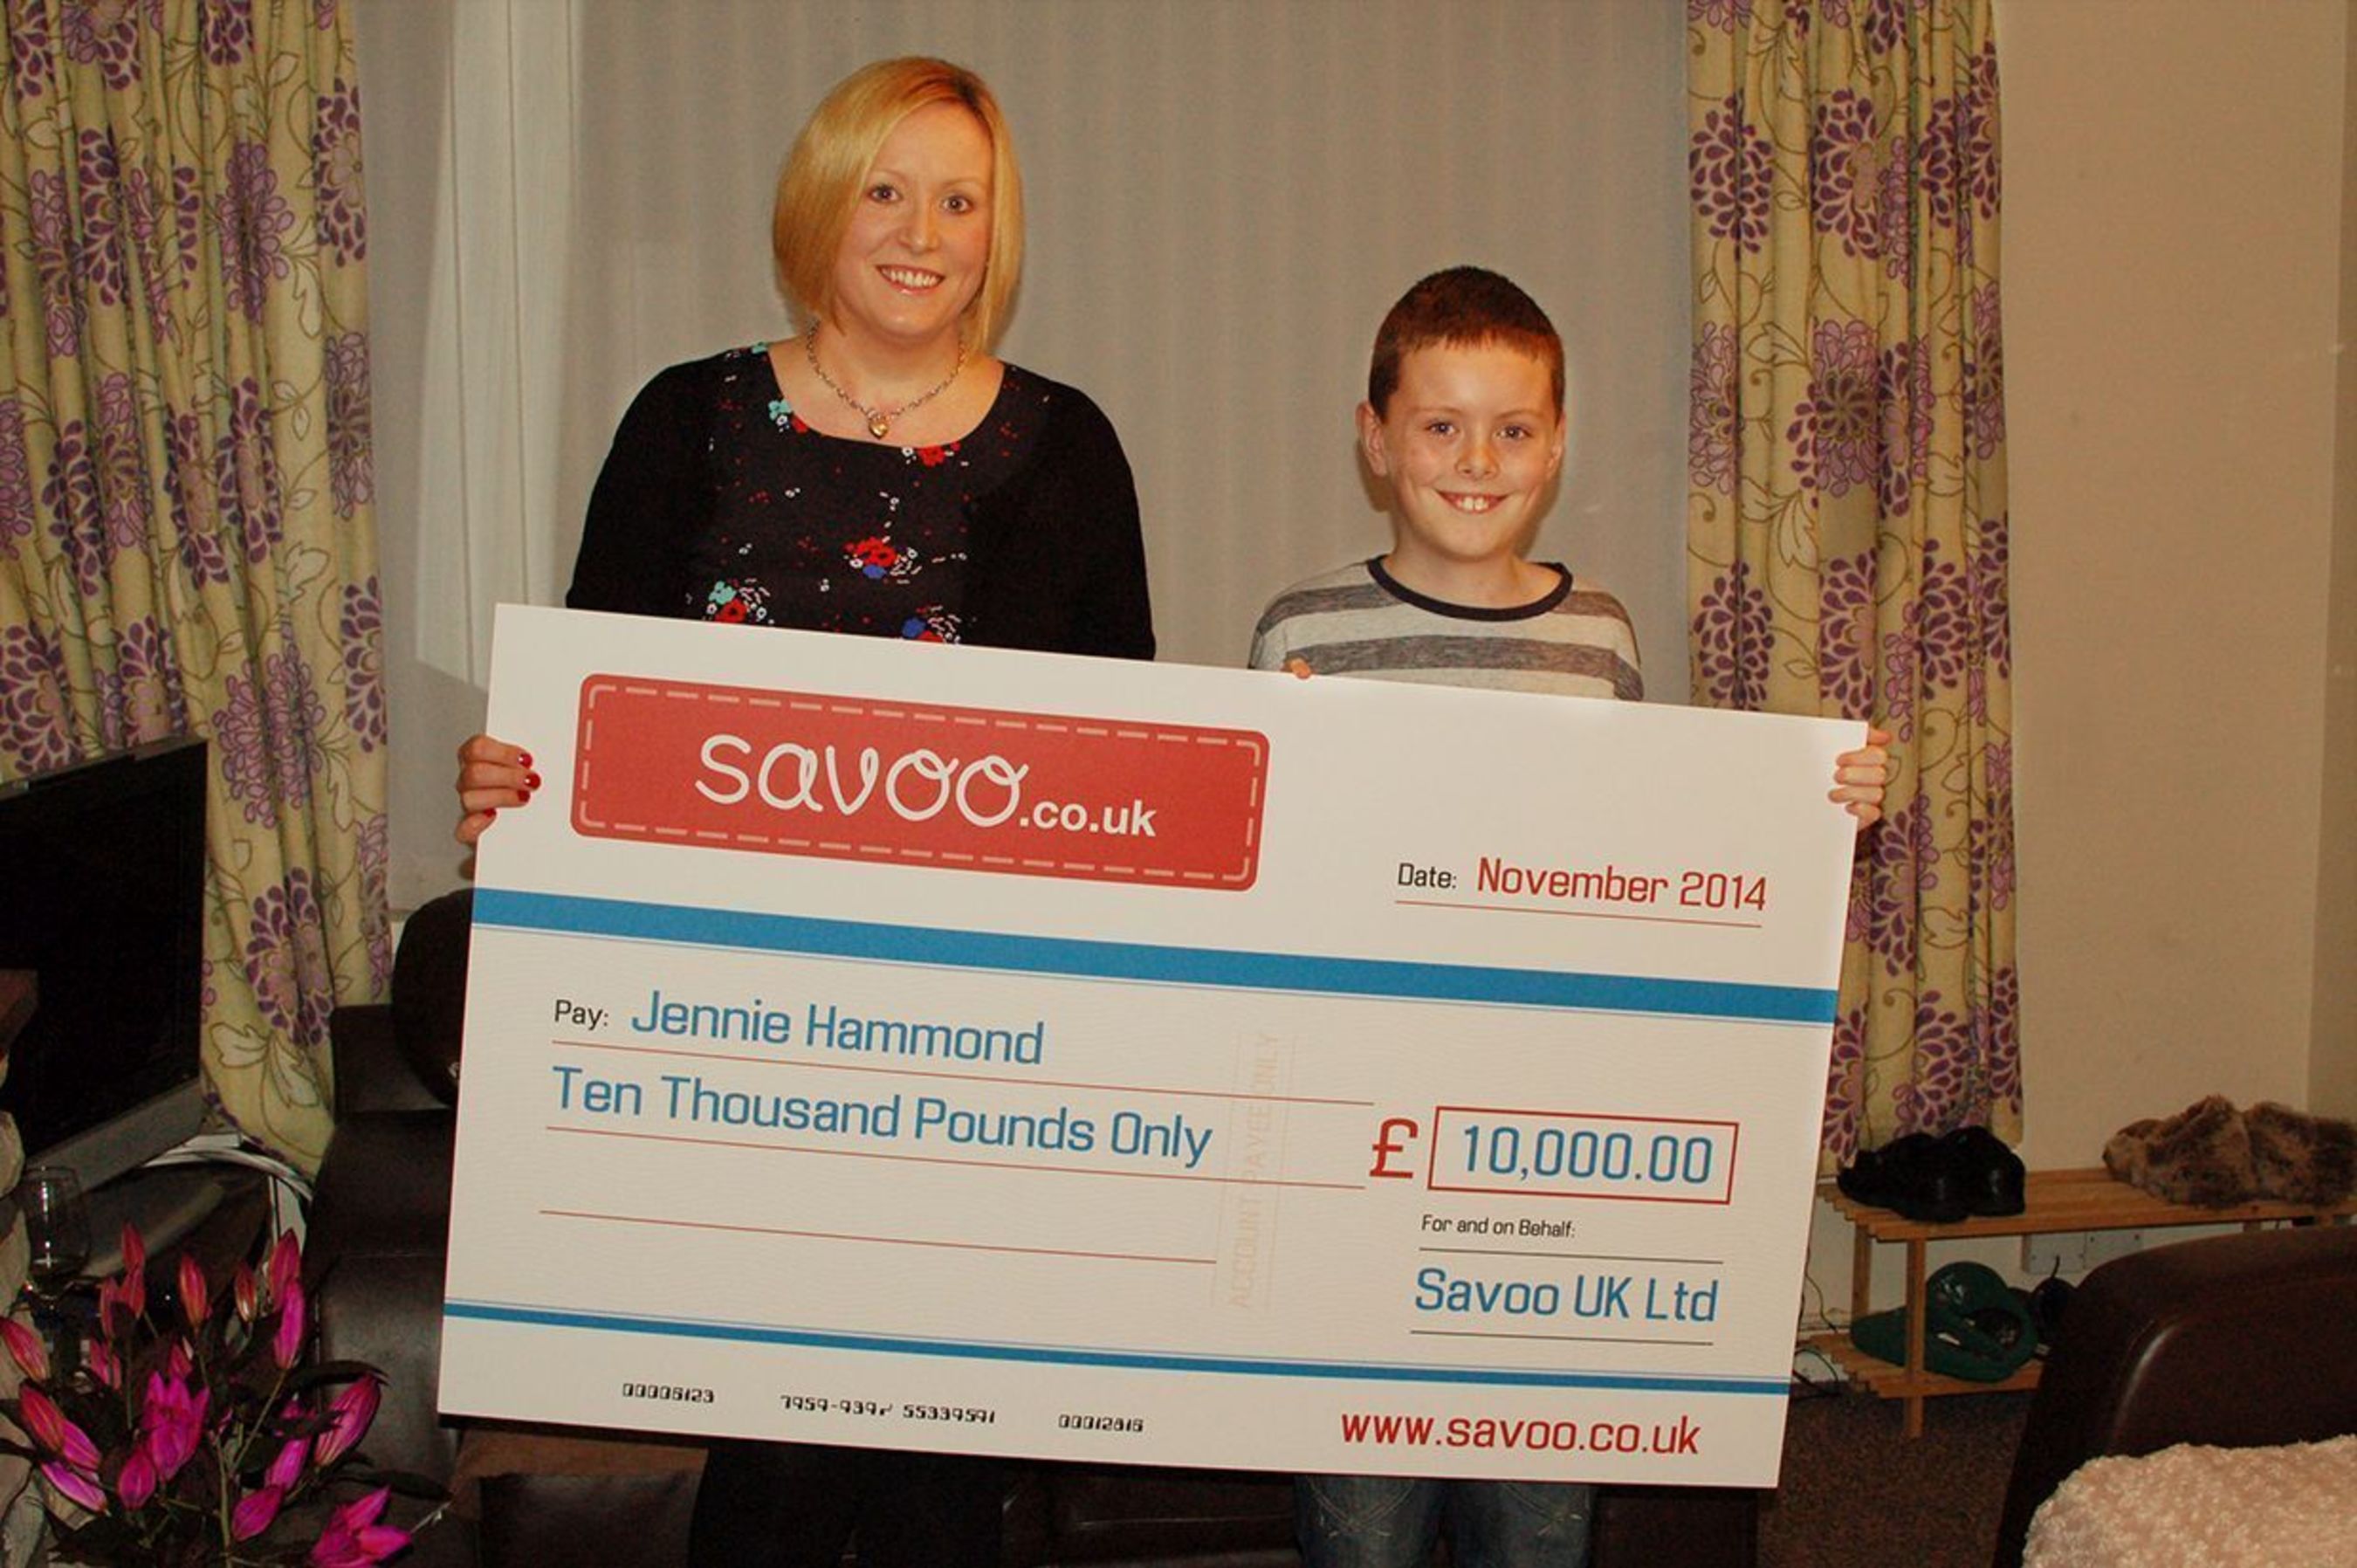 Jennie, her son Ryan and the cheque for ÂPounds Sterling10,000 from Savoo (PRNewsFoto/Savoo_co_uk)